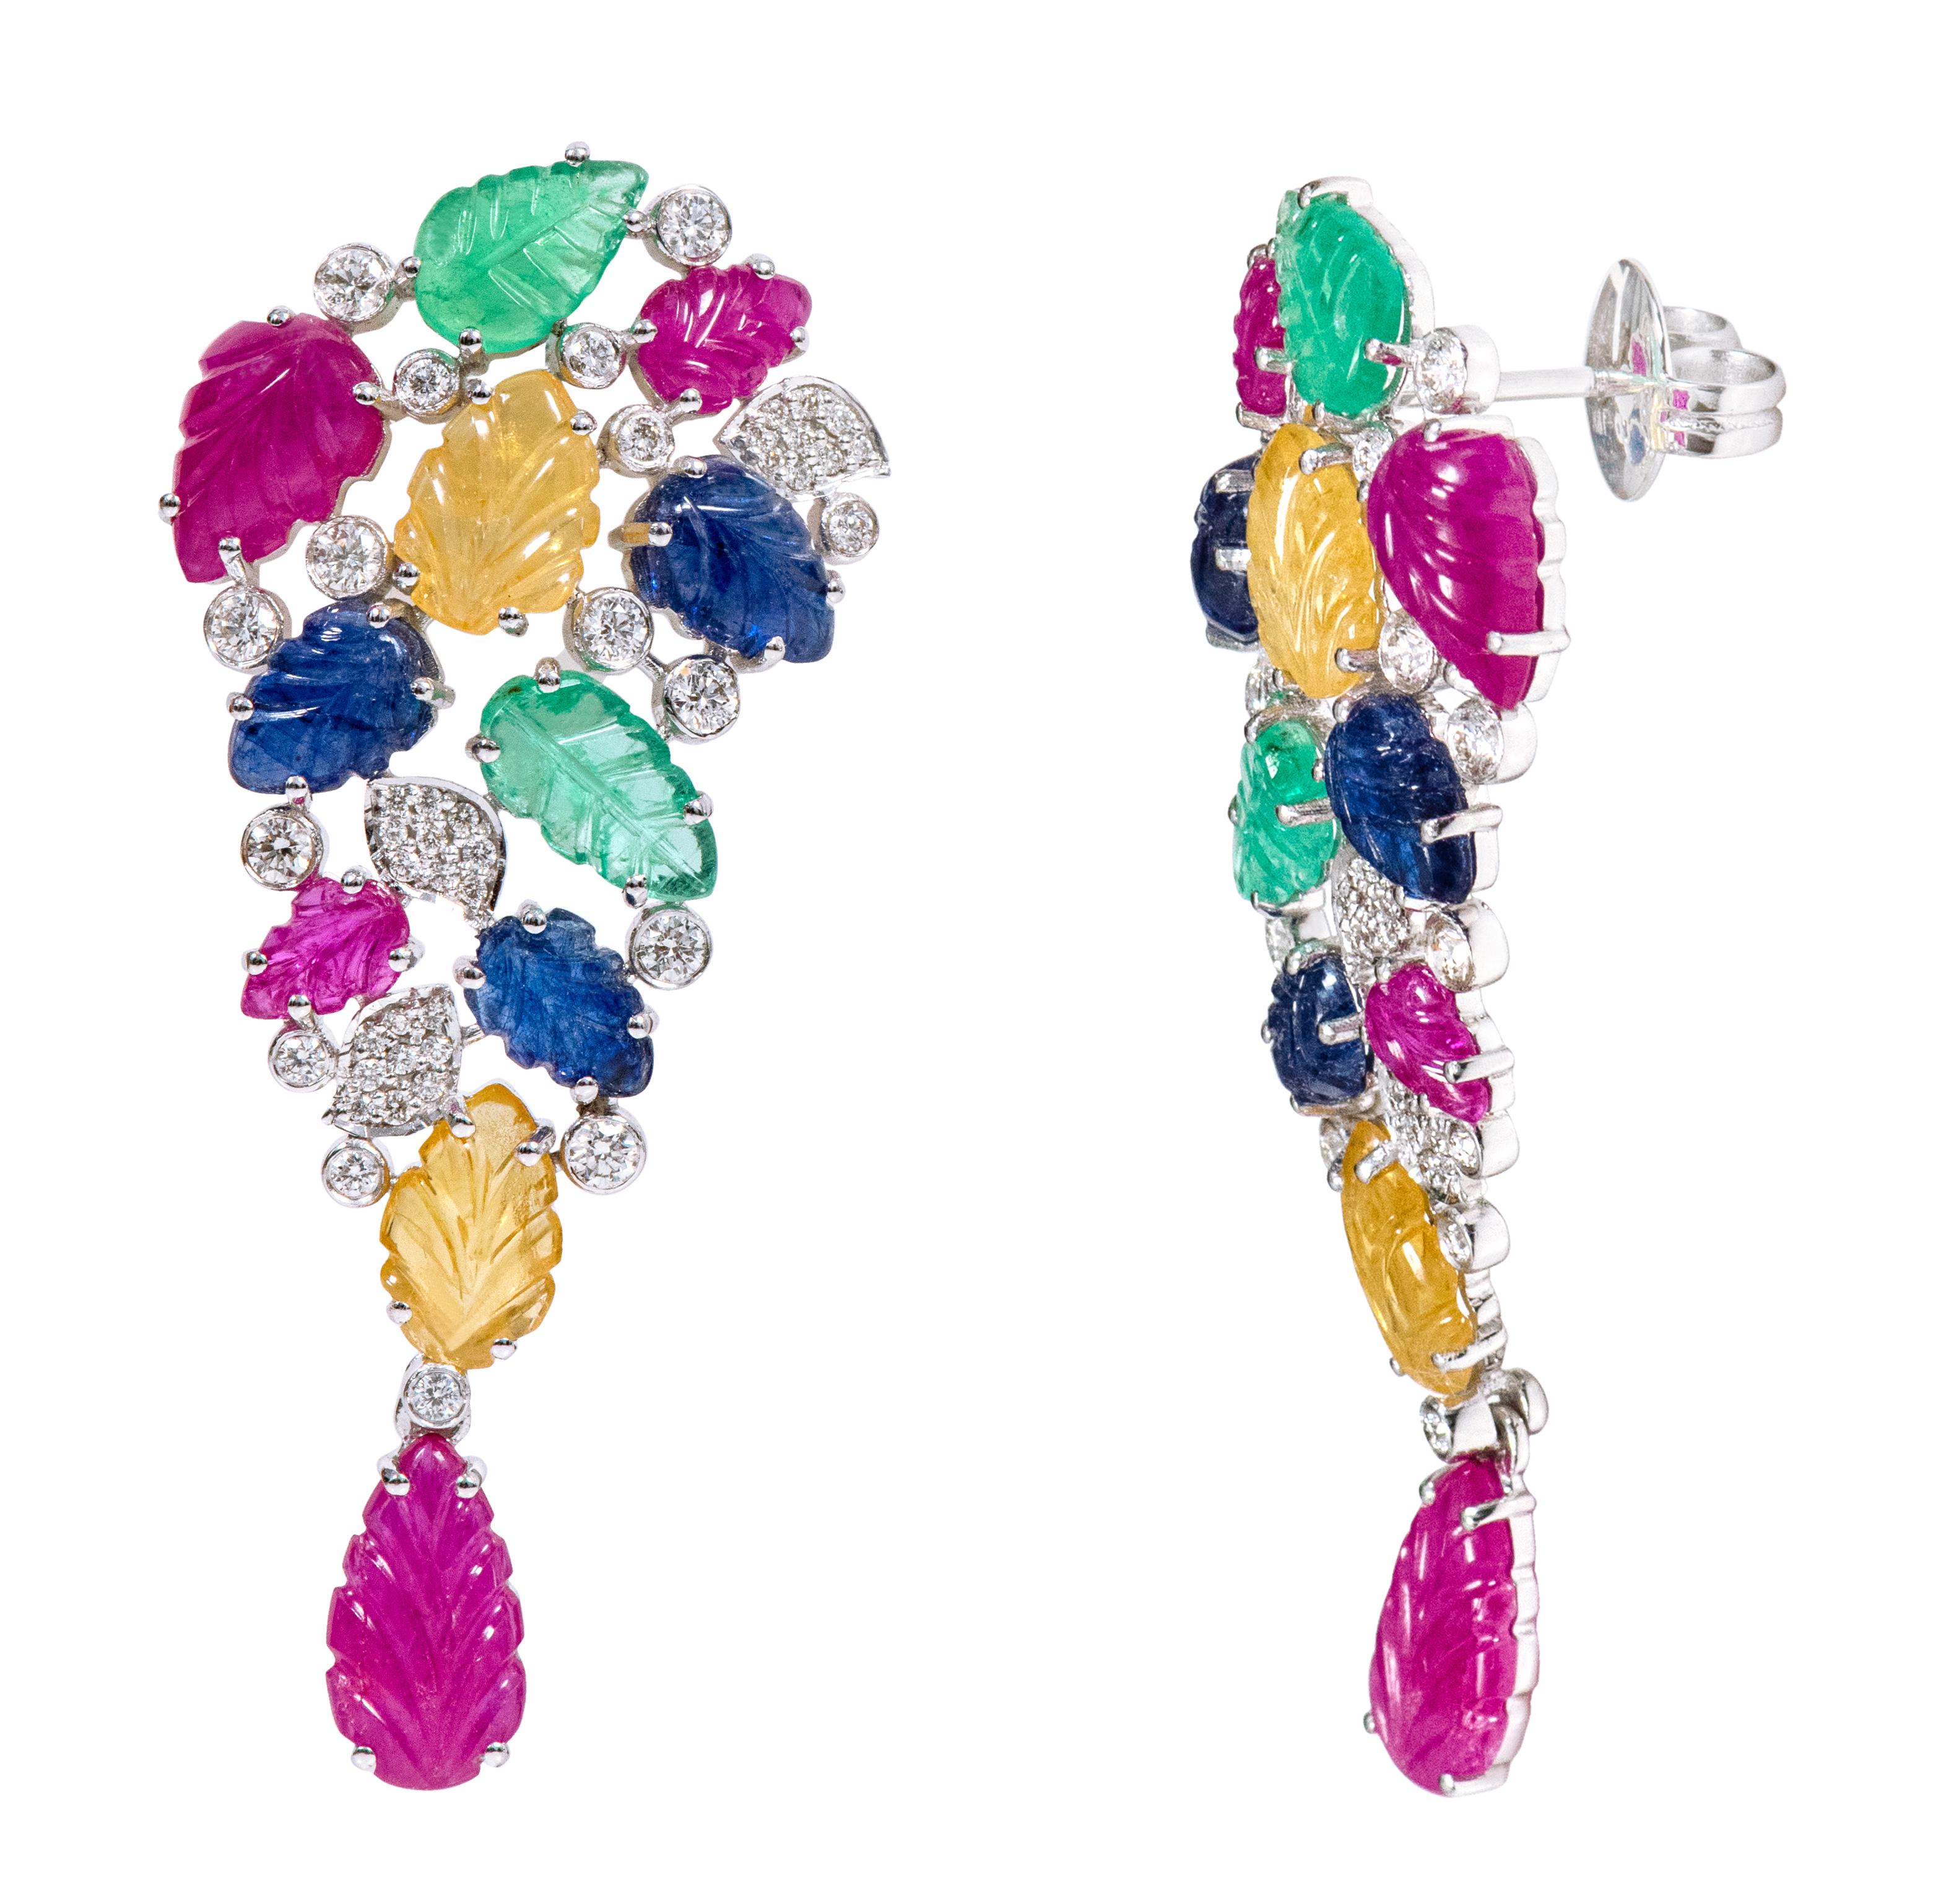 18 Karat White Gold 17.07 Carat Diamond and Carved Ruby, Sapphire, and Emerald Drop Earrings

This extraordinary mix of precious stone leaf carving and diamond long drop tutti-frutti earring is incredible. The beautiful combination of emerald, ruby,